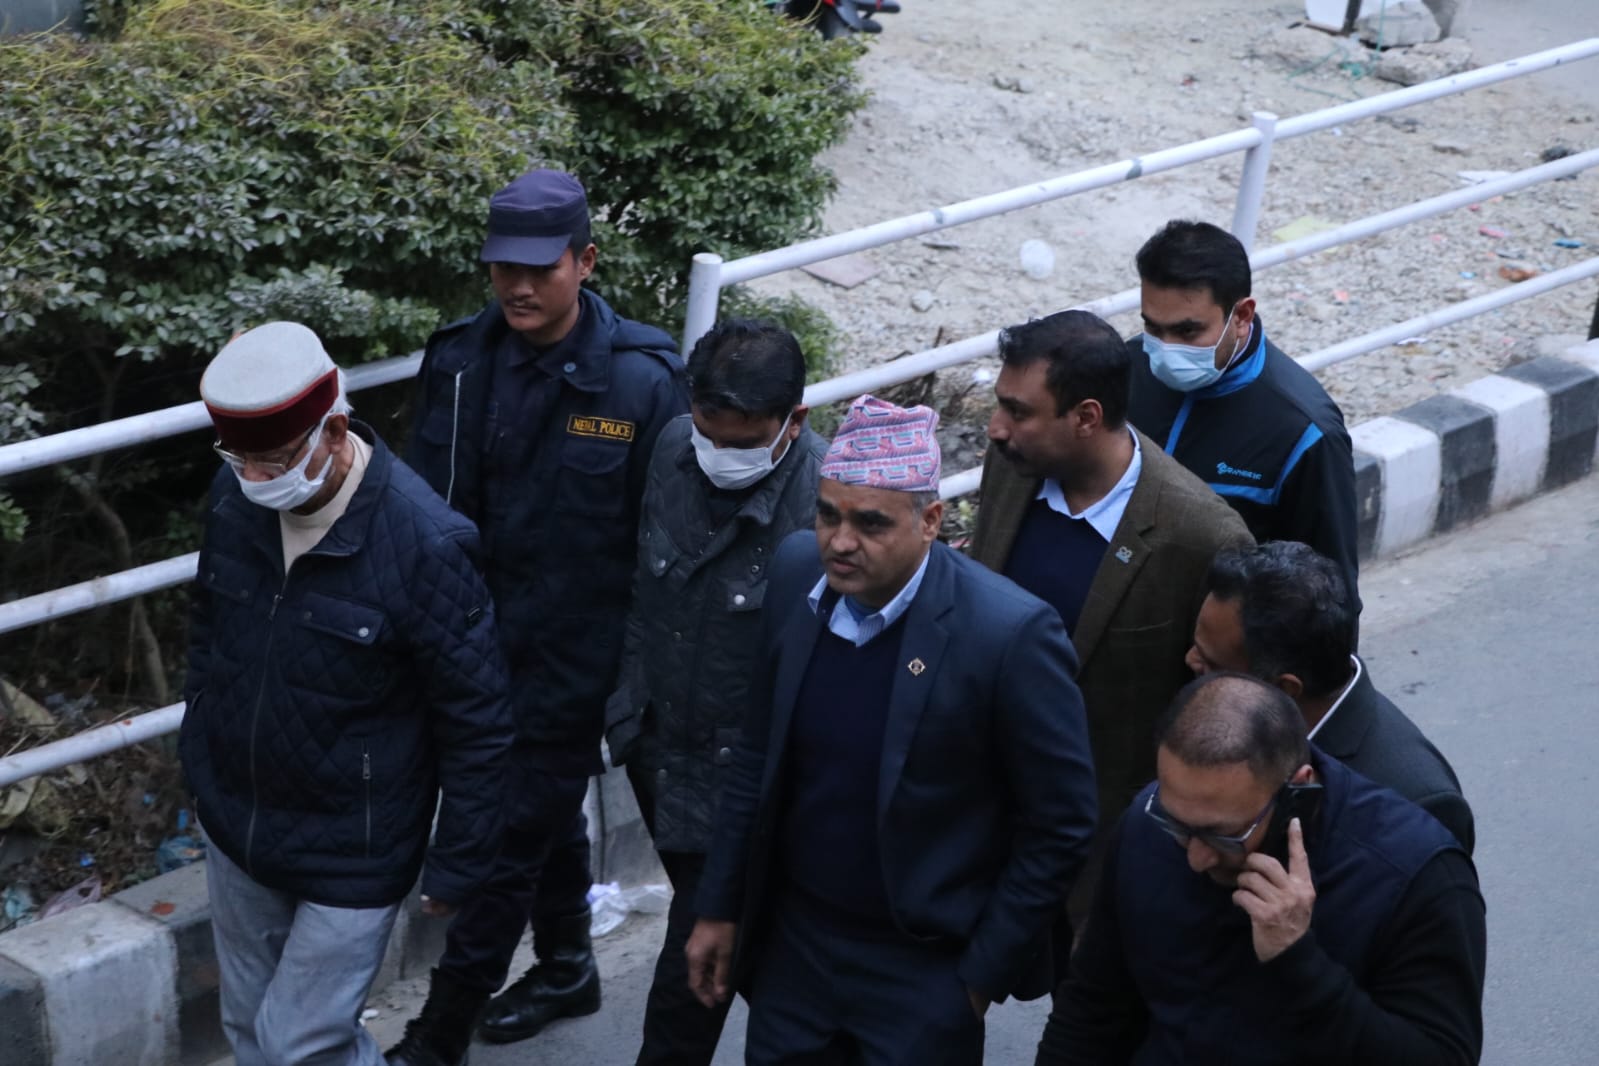 Kathmandu Court allows 4-day detention for Chaudhary and Thapa in Bansbari land grab case